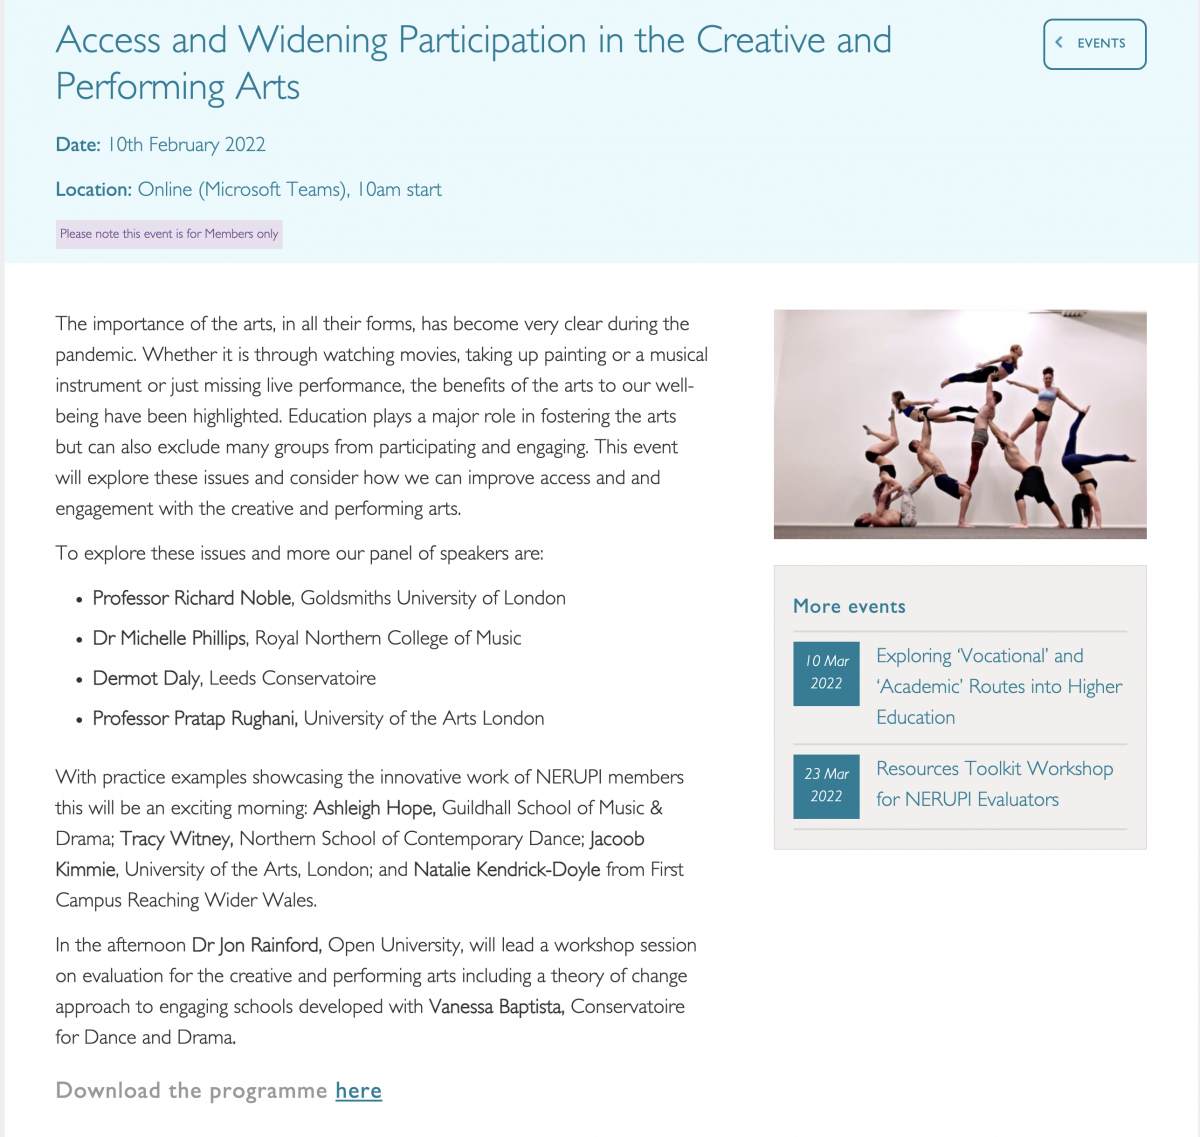 Access and Widening Participation in the Creative and Performing Arts @NERUPI 20 Feb 2022